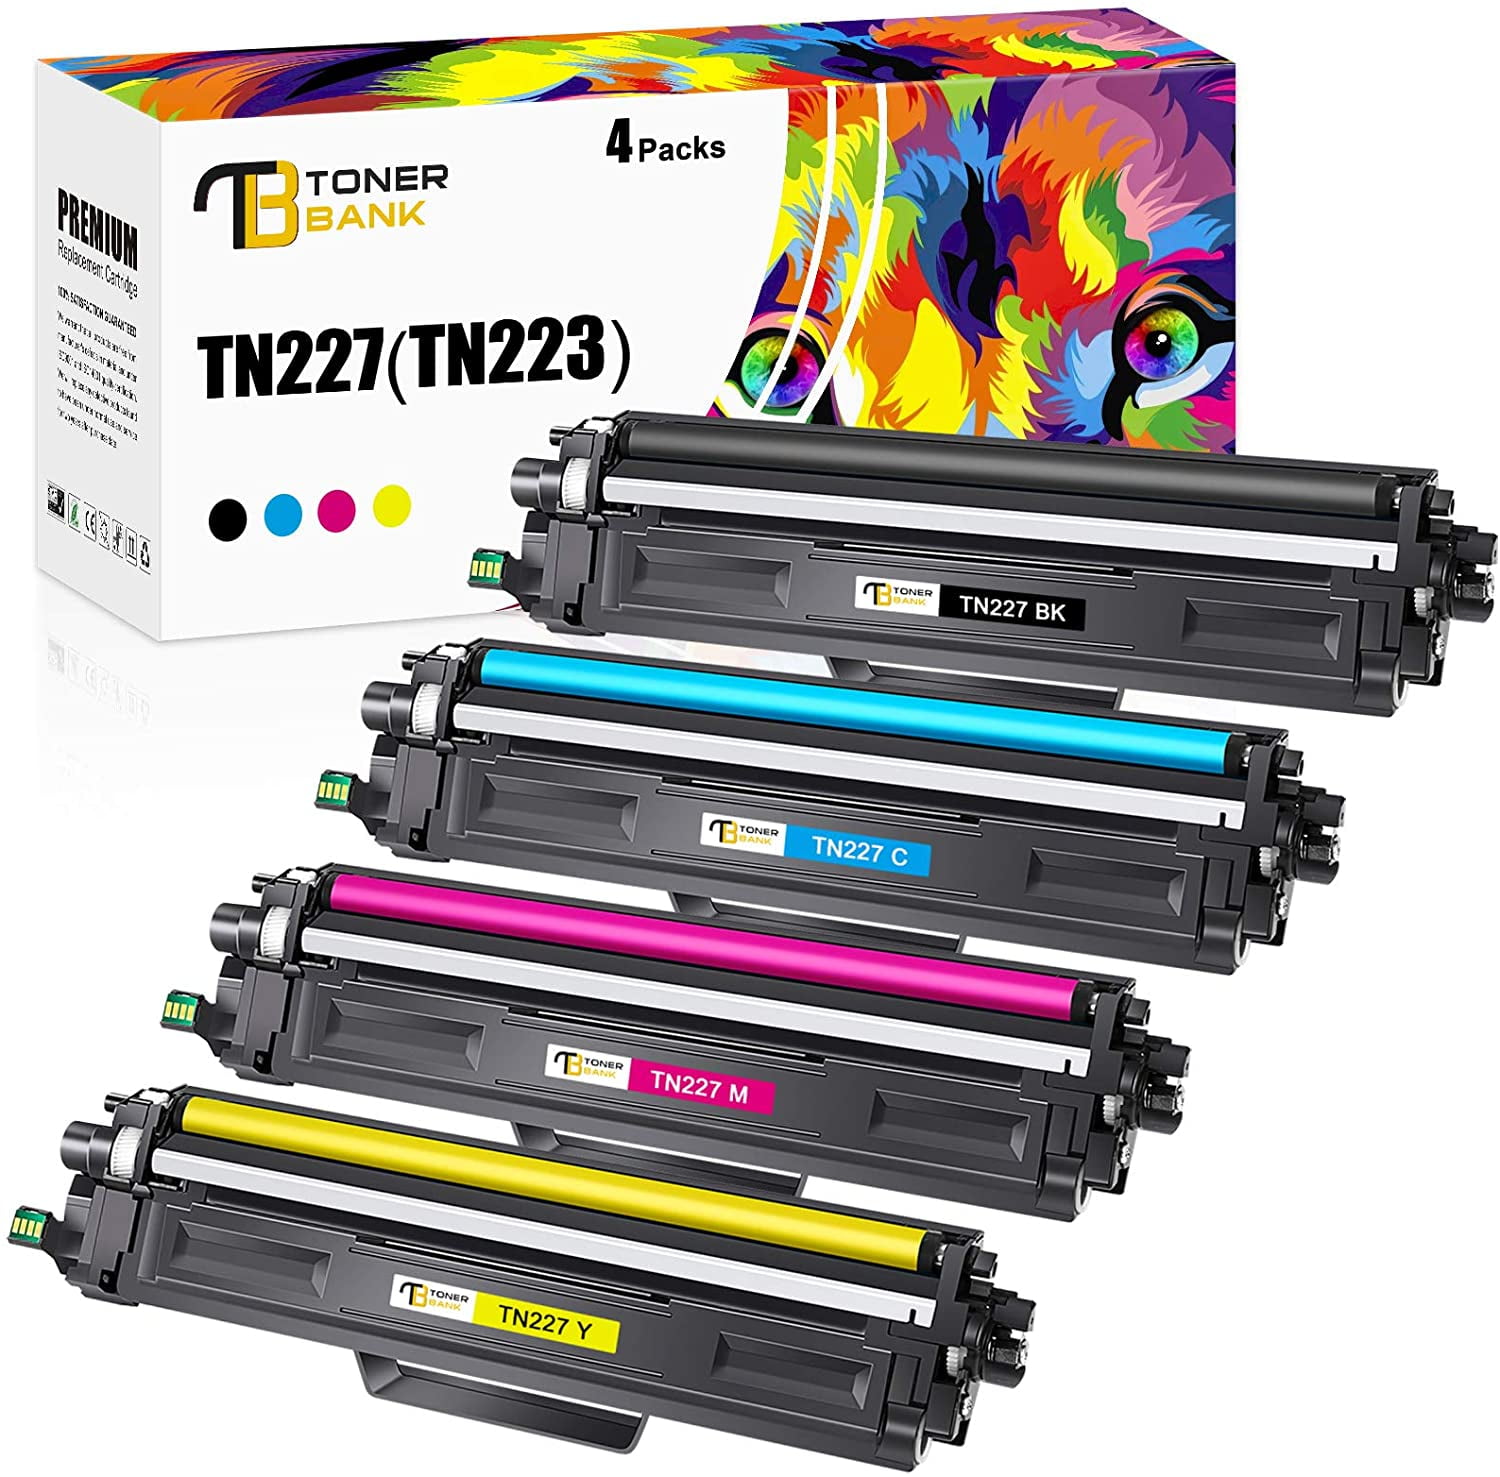 4x TN243 TN247 Toner Cartridge with Chip Compatible Brother HL L3270CDW  L3290CDW L3210CW L3230CDW MFC L3710CW L3750CDN L3770CDW